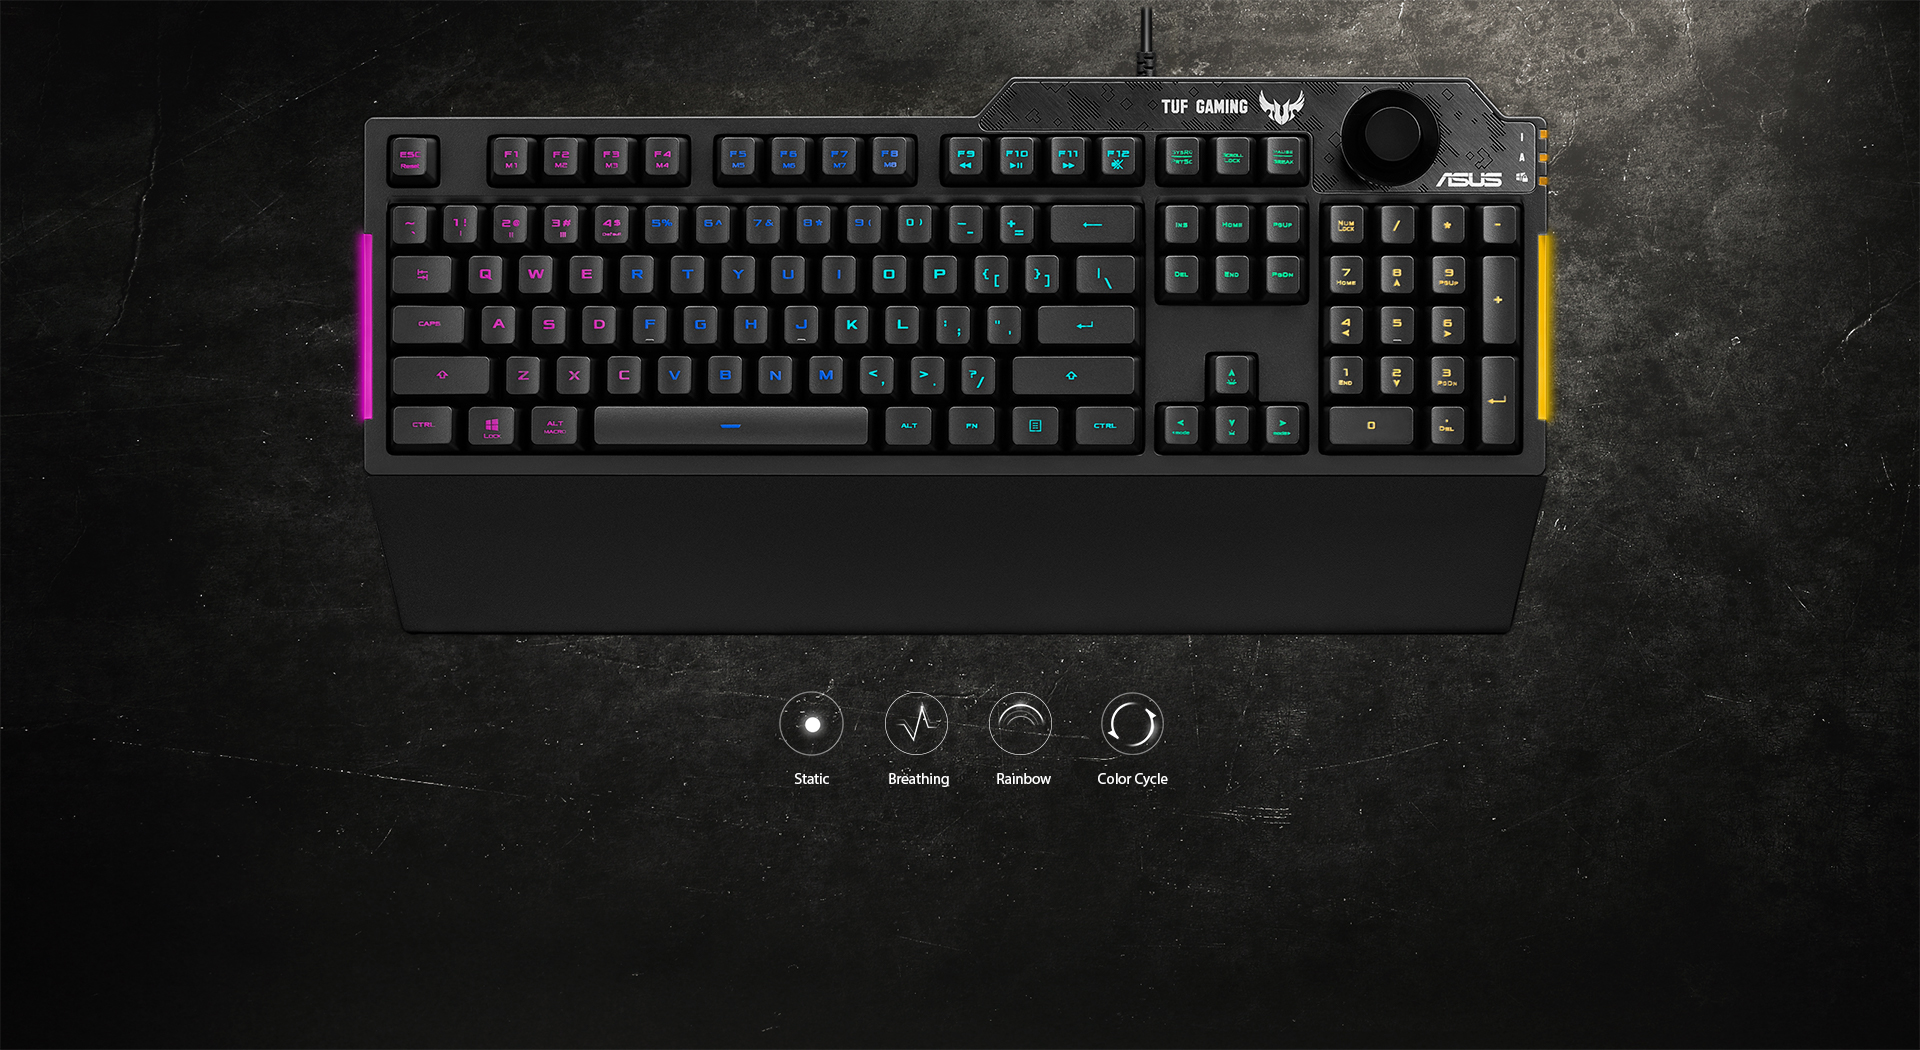 ASUS TUF Gaming K1 features five lighting zones and RGB bars along the left and right sides of the keyboard